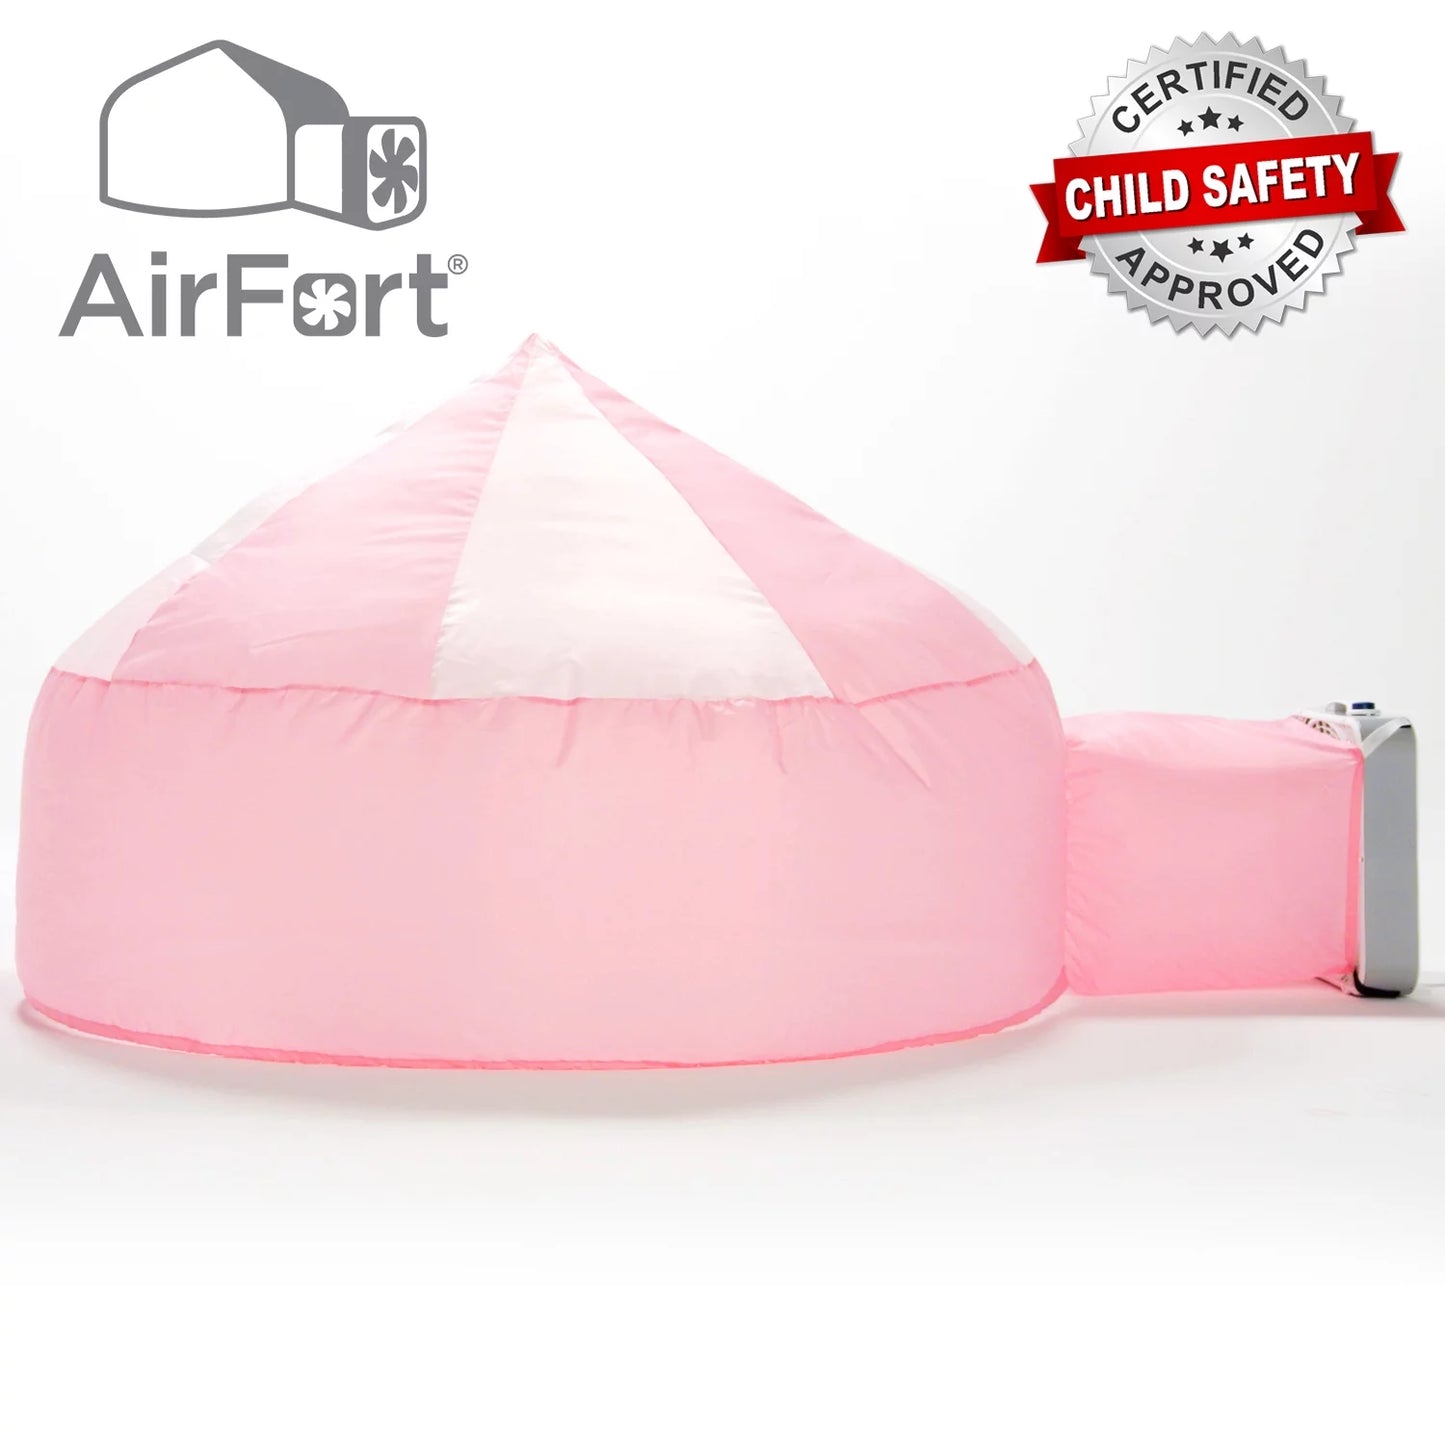 Pretty in Pink Air Fort